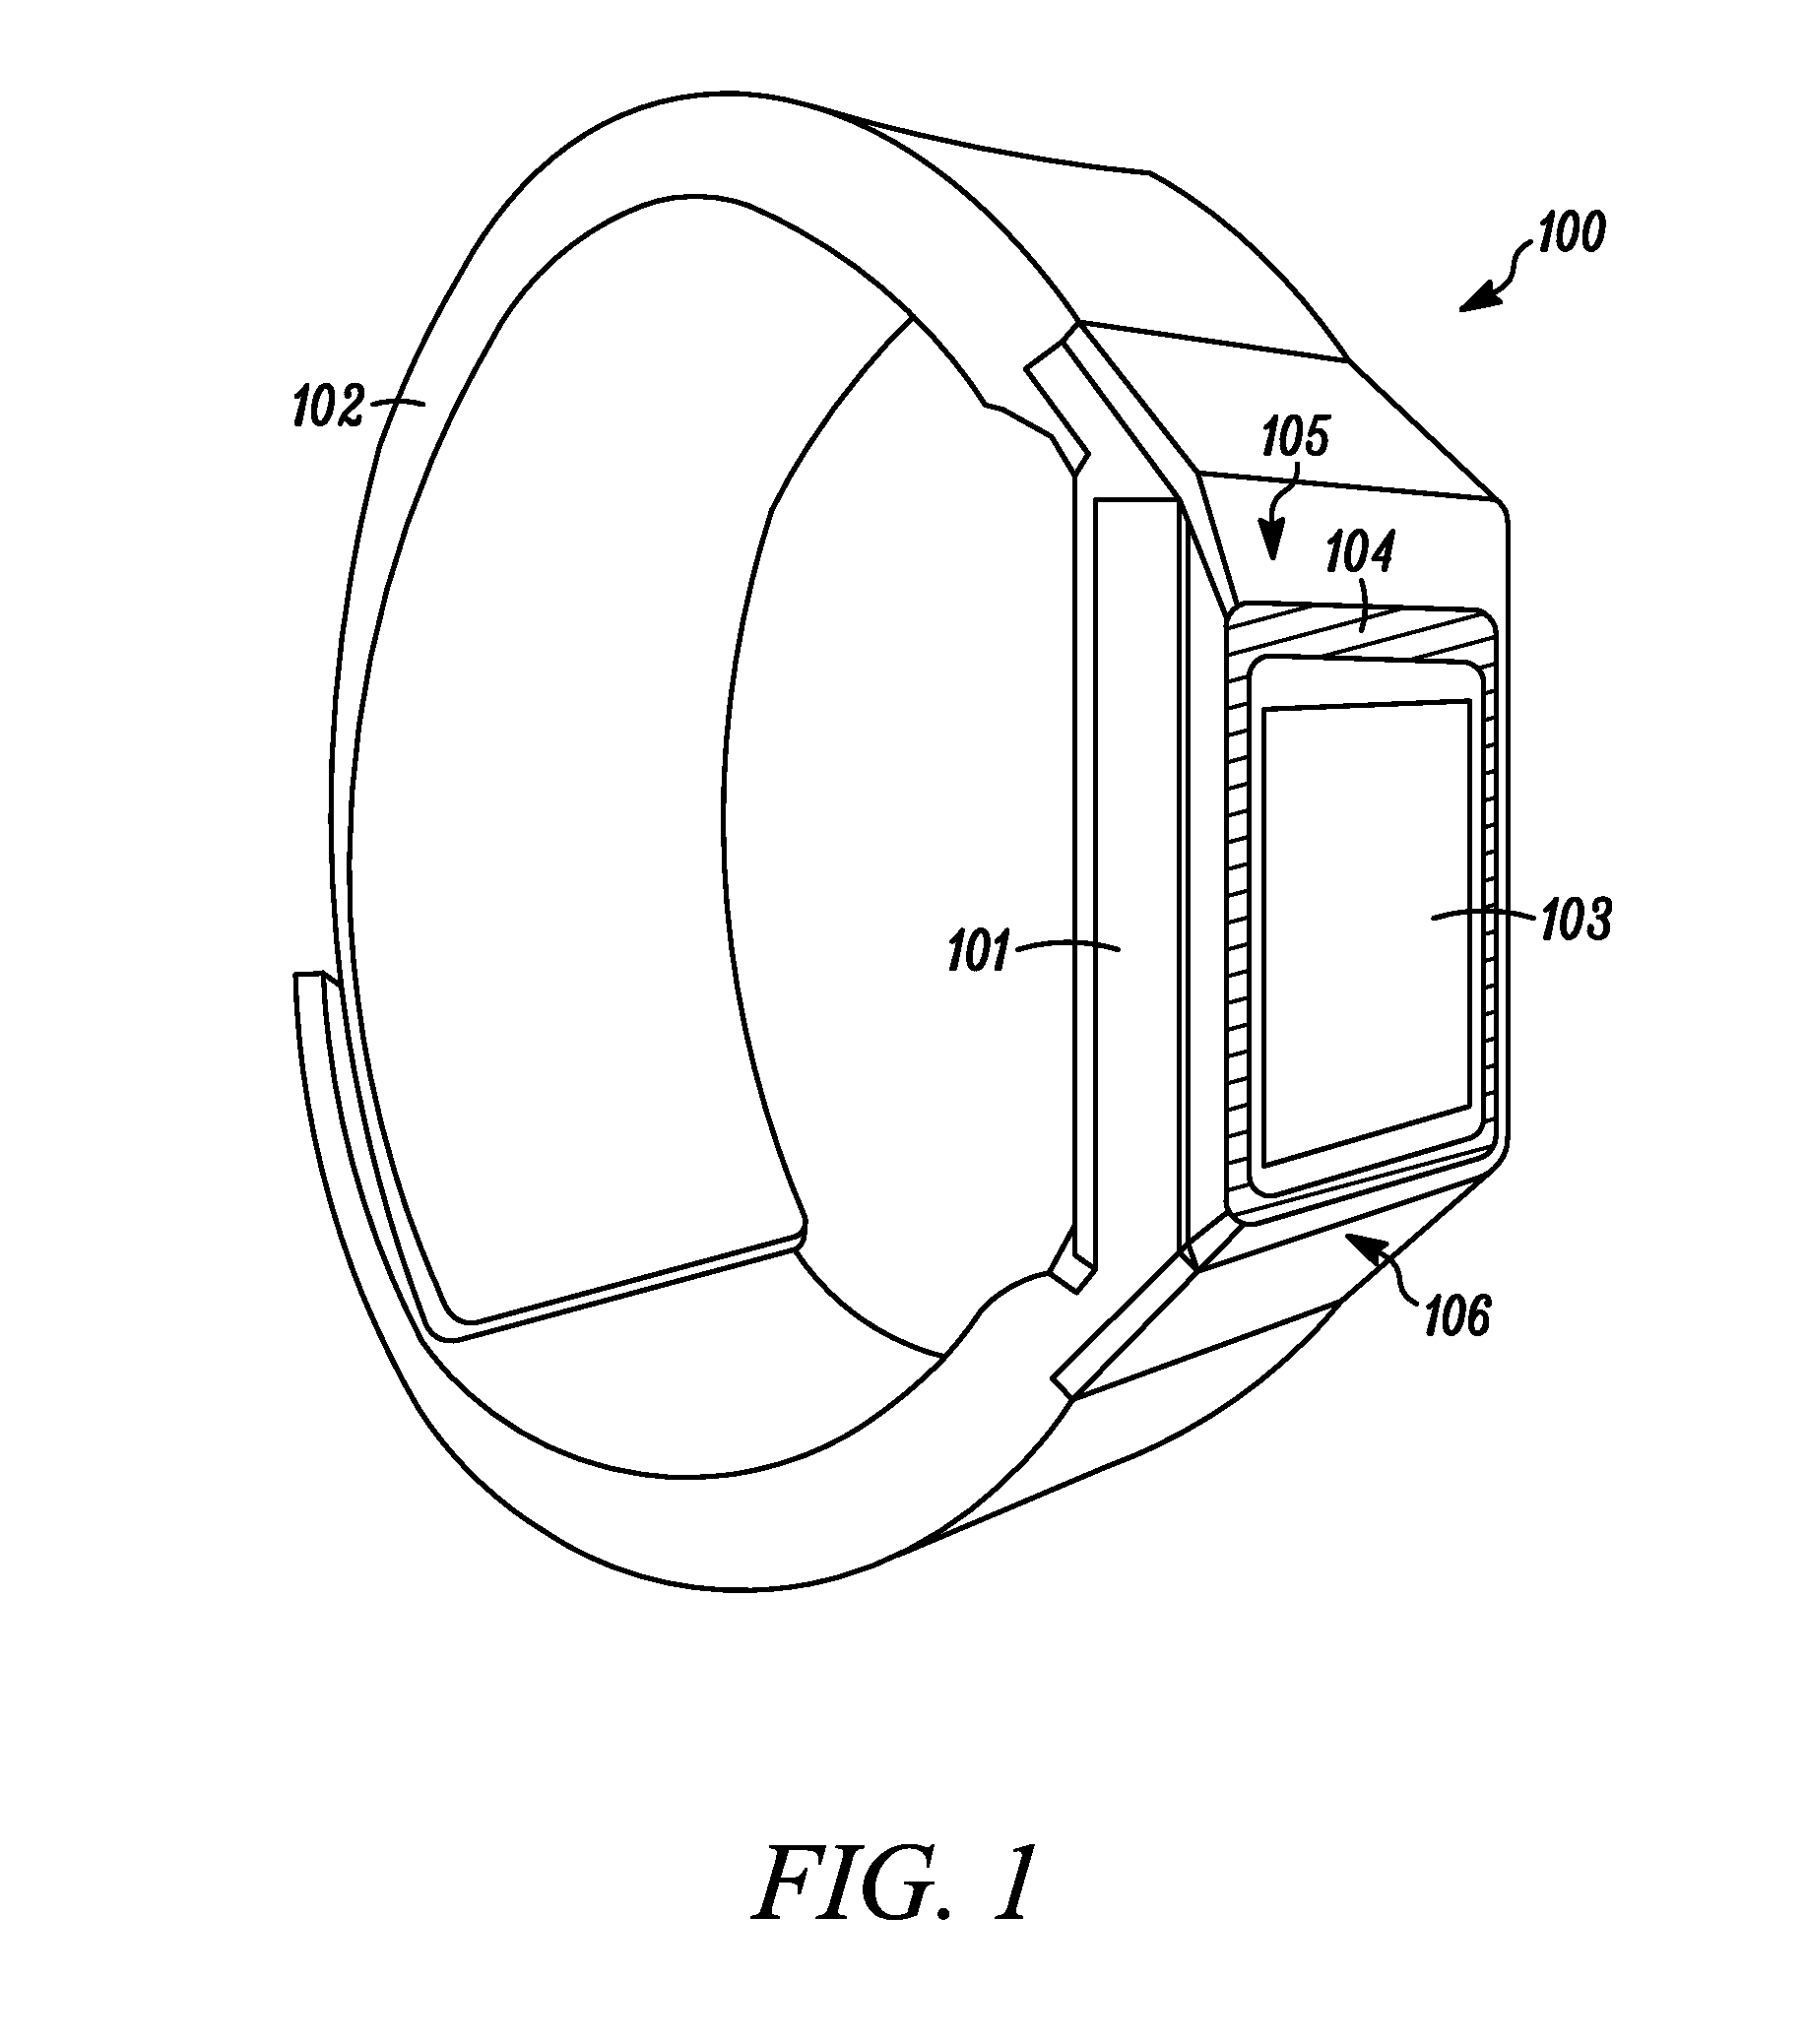 Methods and Apparatus for Providing Feedback from an Electronic Device